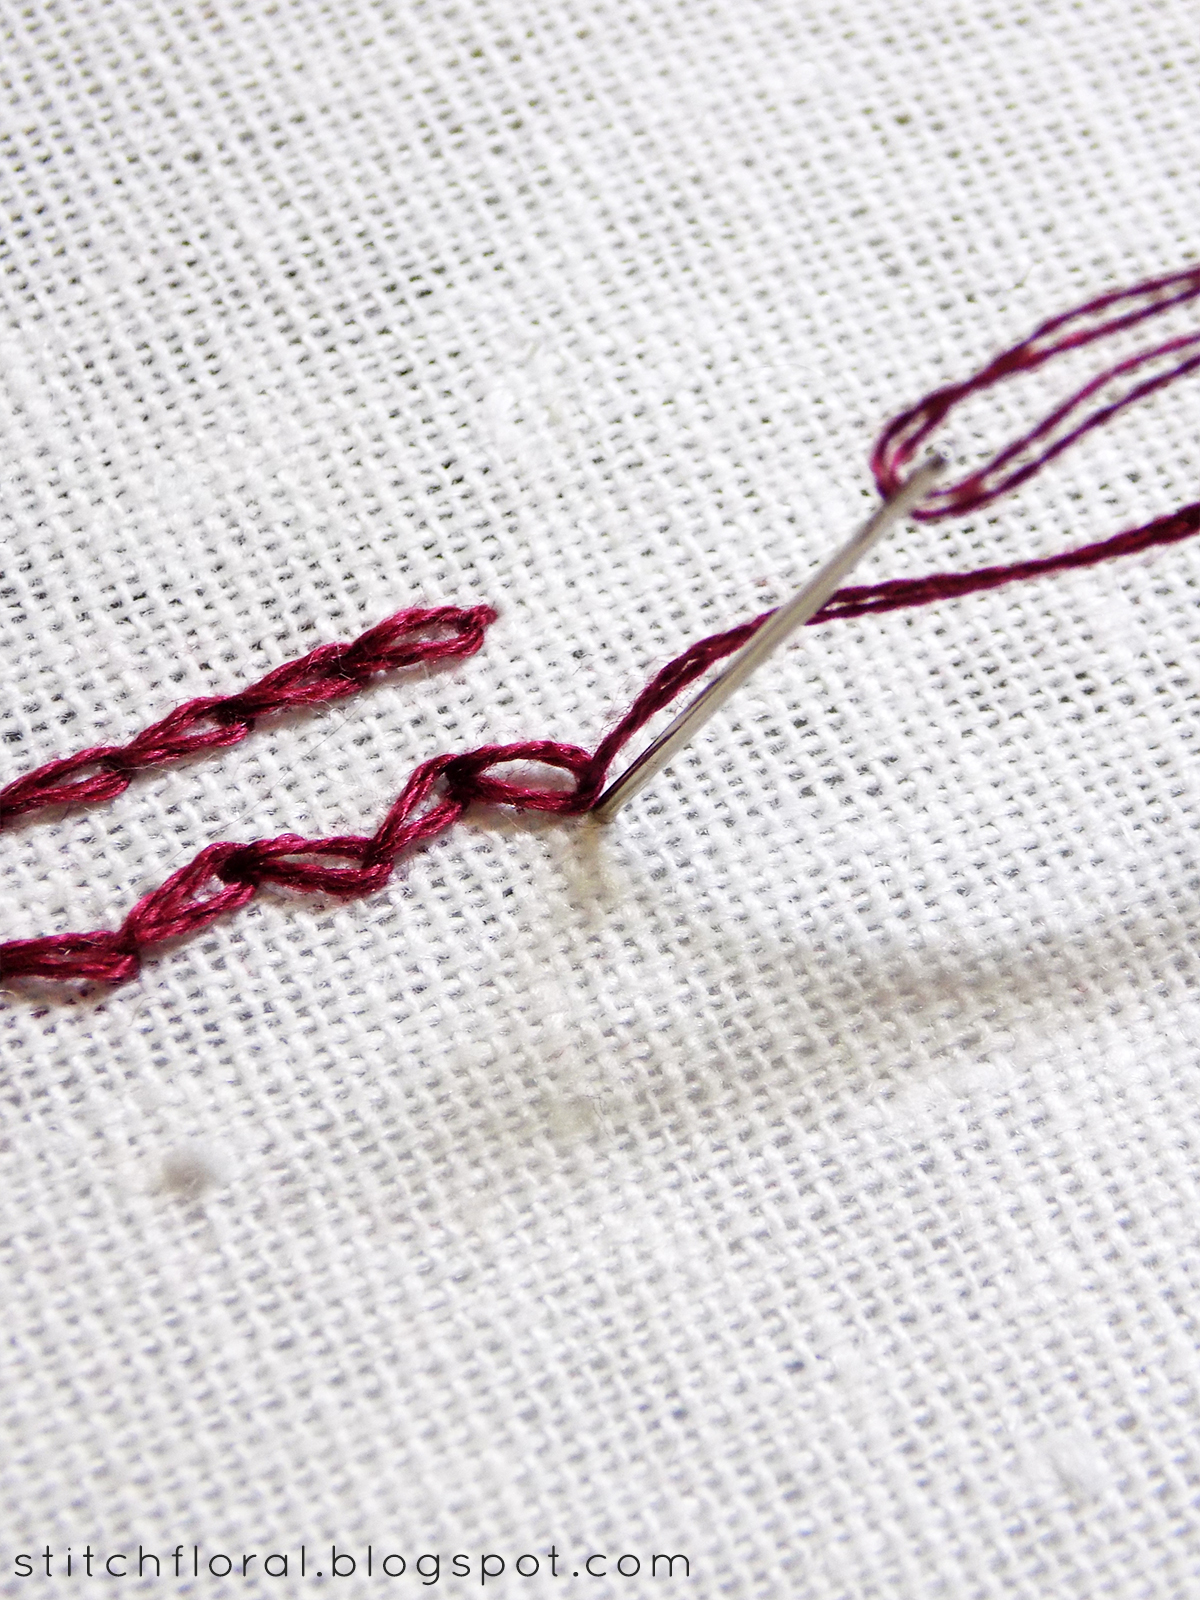 Learn How to Embroider Zig Zag Chain Stitch